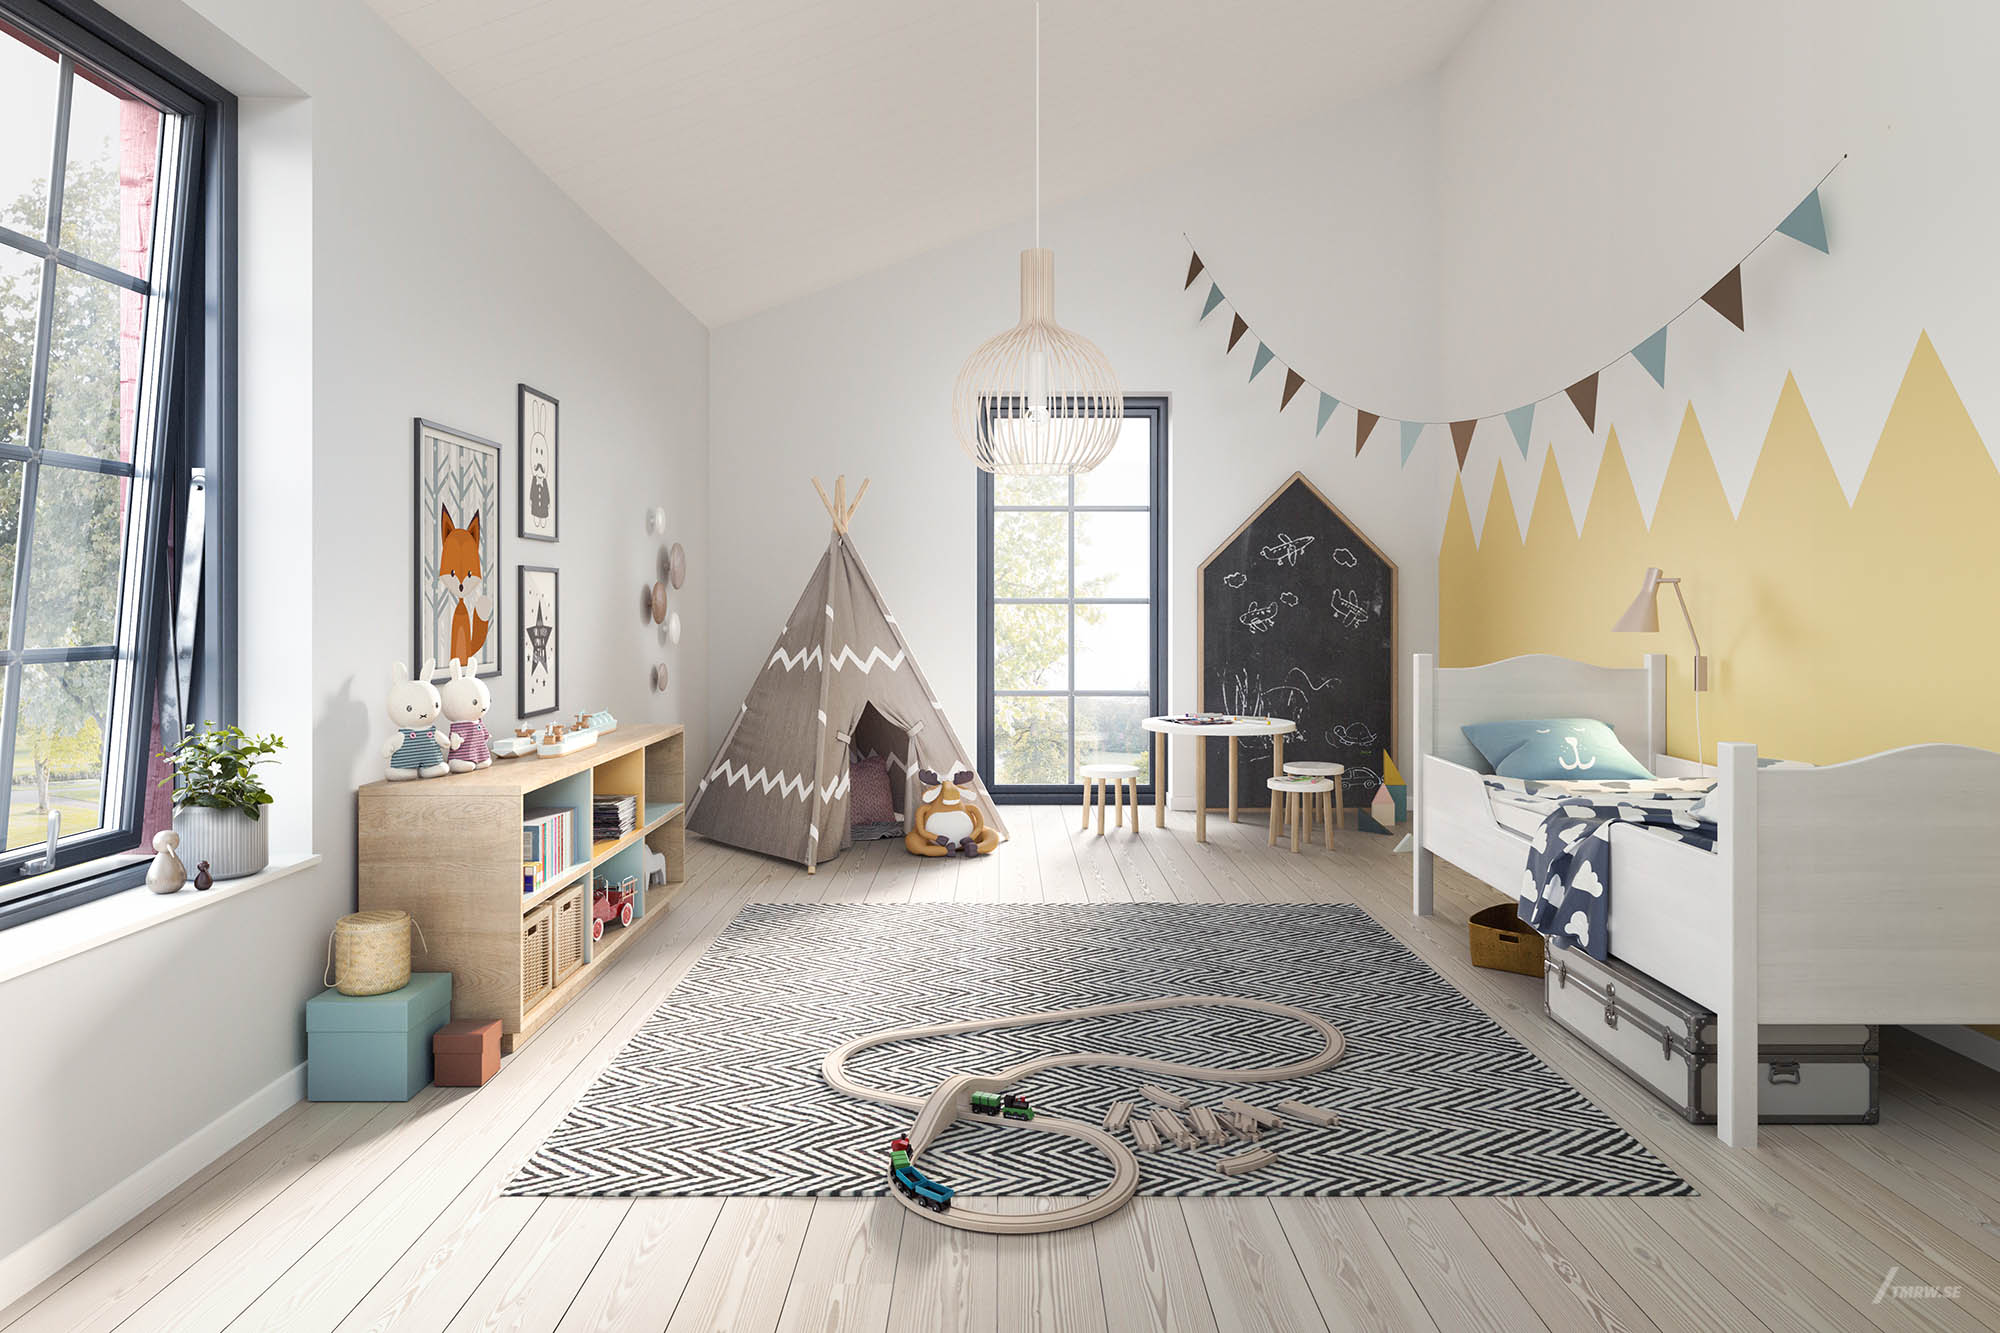 Architectural visualization of Svenska Fönster a project for Skarp, a interior children's room in day light from an eye level view.